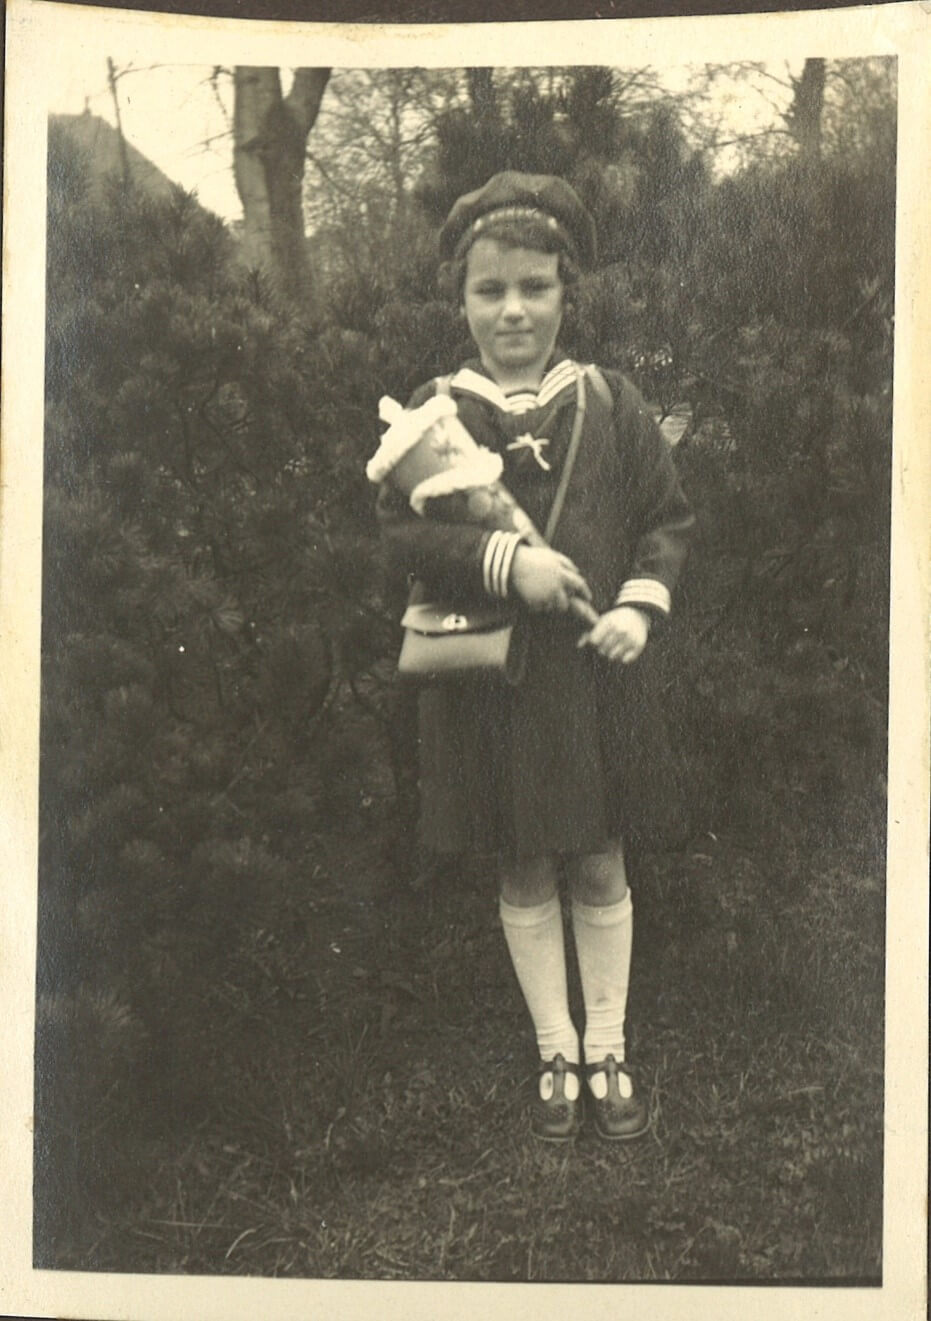 Marion's first day of school in Germany, circa 1933